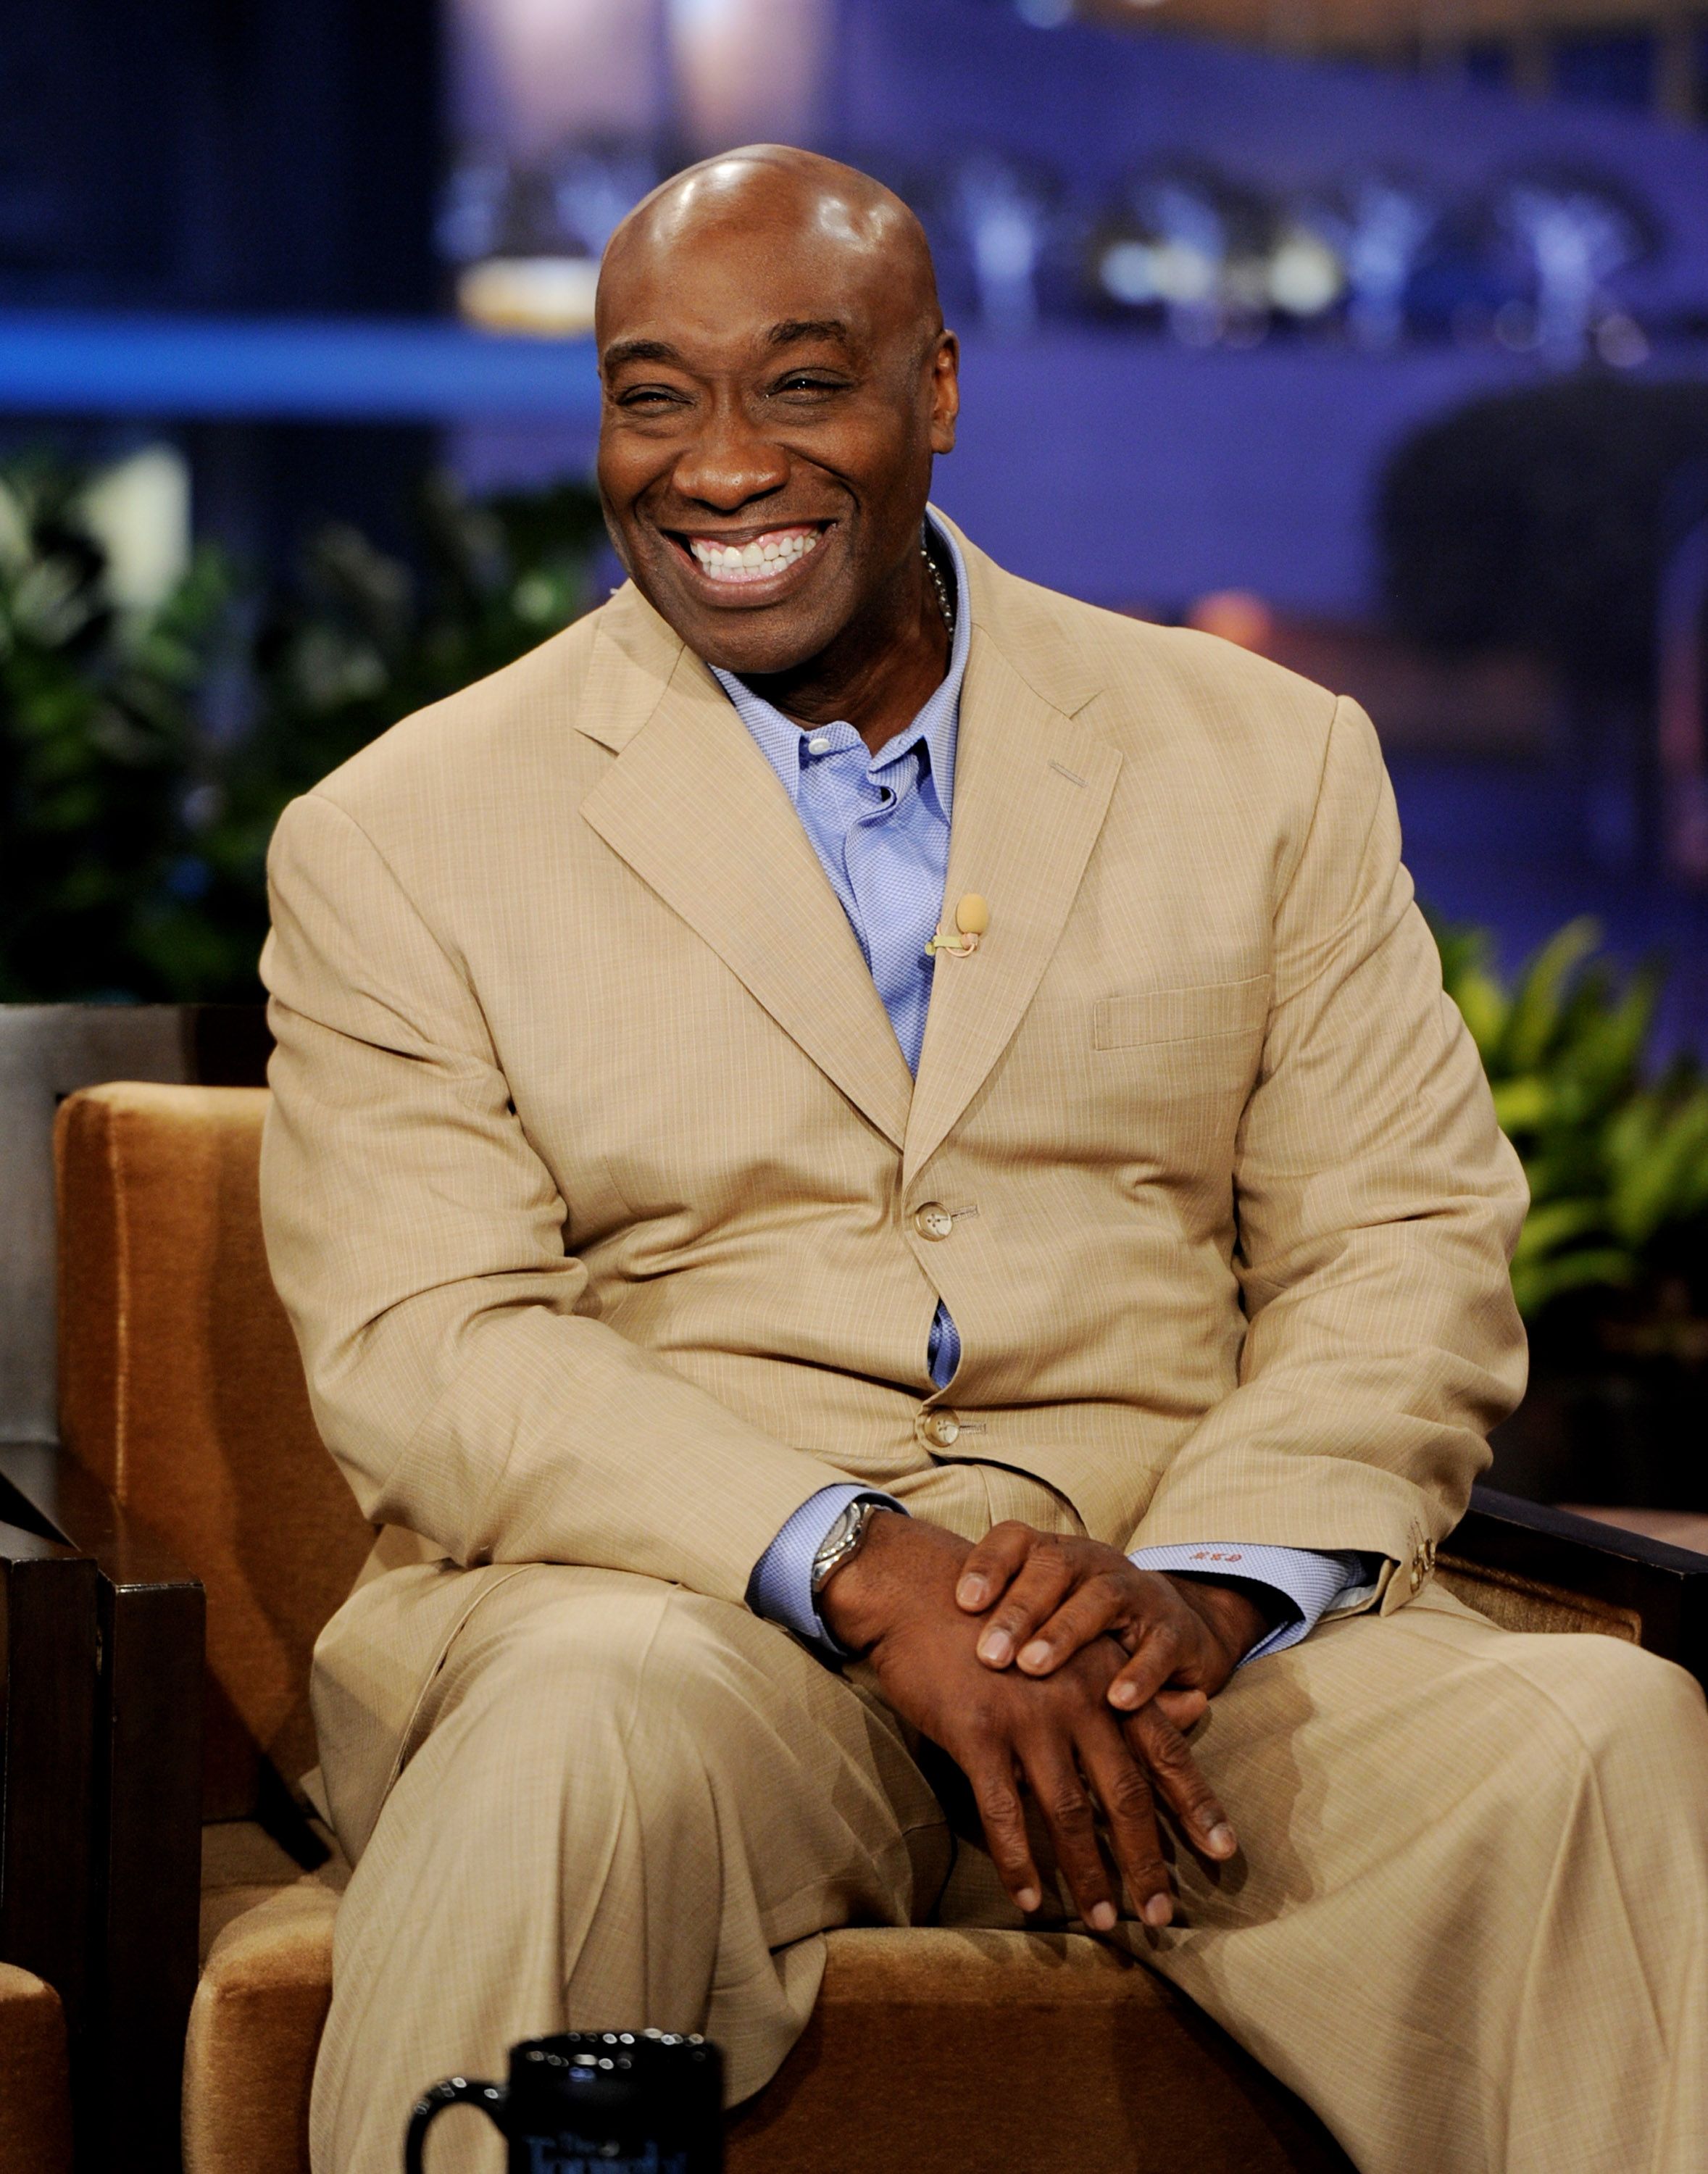 Michael Clarke Duncan tritt am 20. Februar 2012 in "The Tonight Show With Jay Leno" in den NBC Studios auf. | Quelle: Getty Images